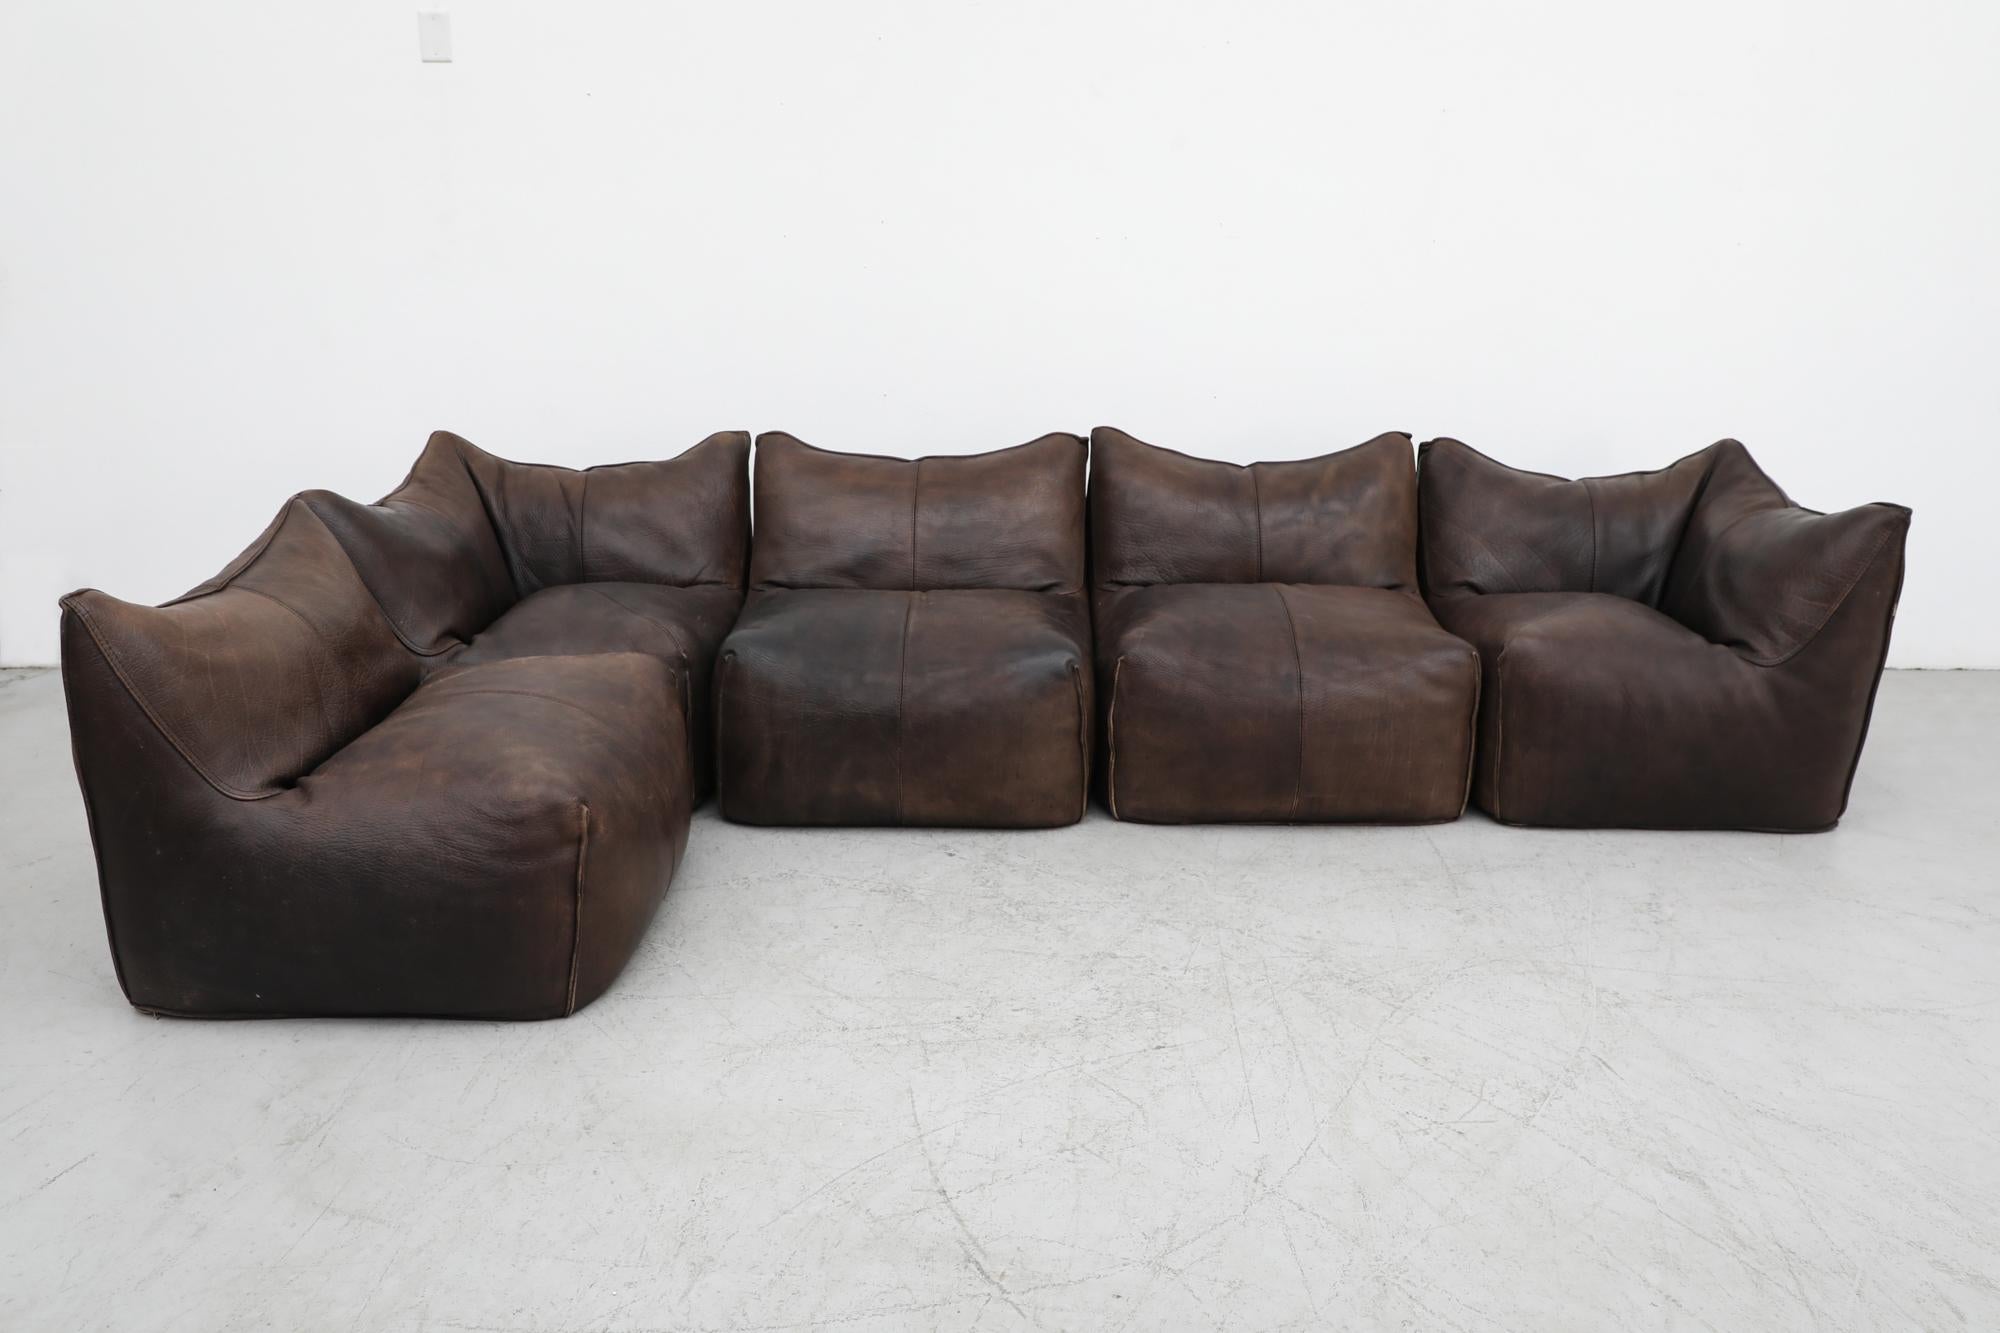 Mario Bellini 'Le Bambole' sofa for B&B Italia. First designed in 1972, and awarded with the Compasso d’Oro in 1979 for its stunning design and comfortability. This modular sofa is composed of five individual pieces of thick buffalo leather